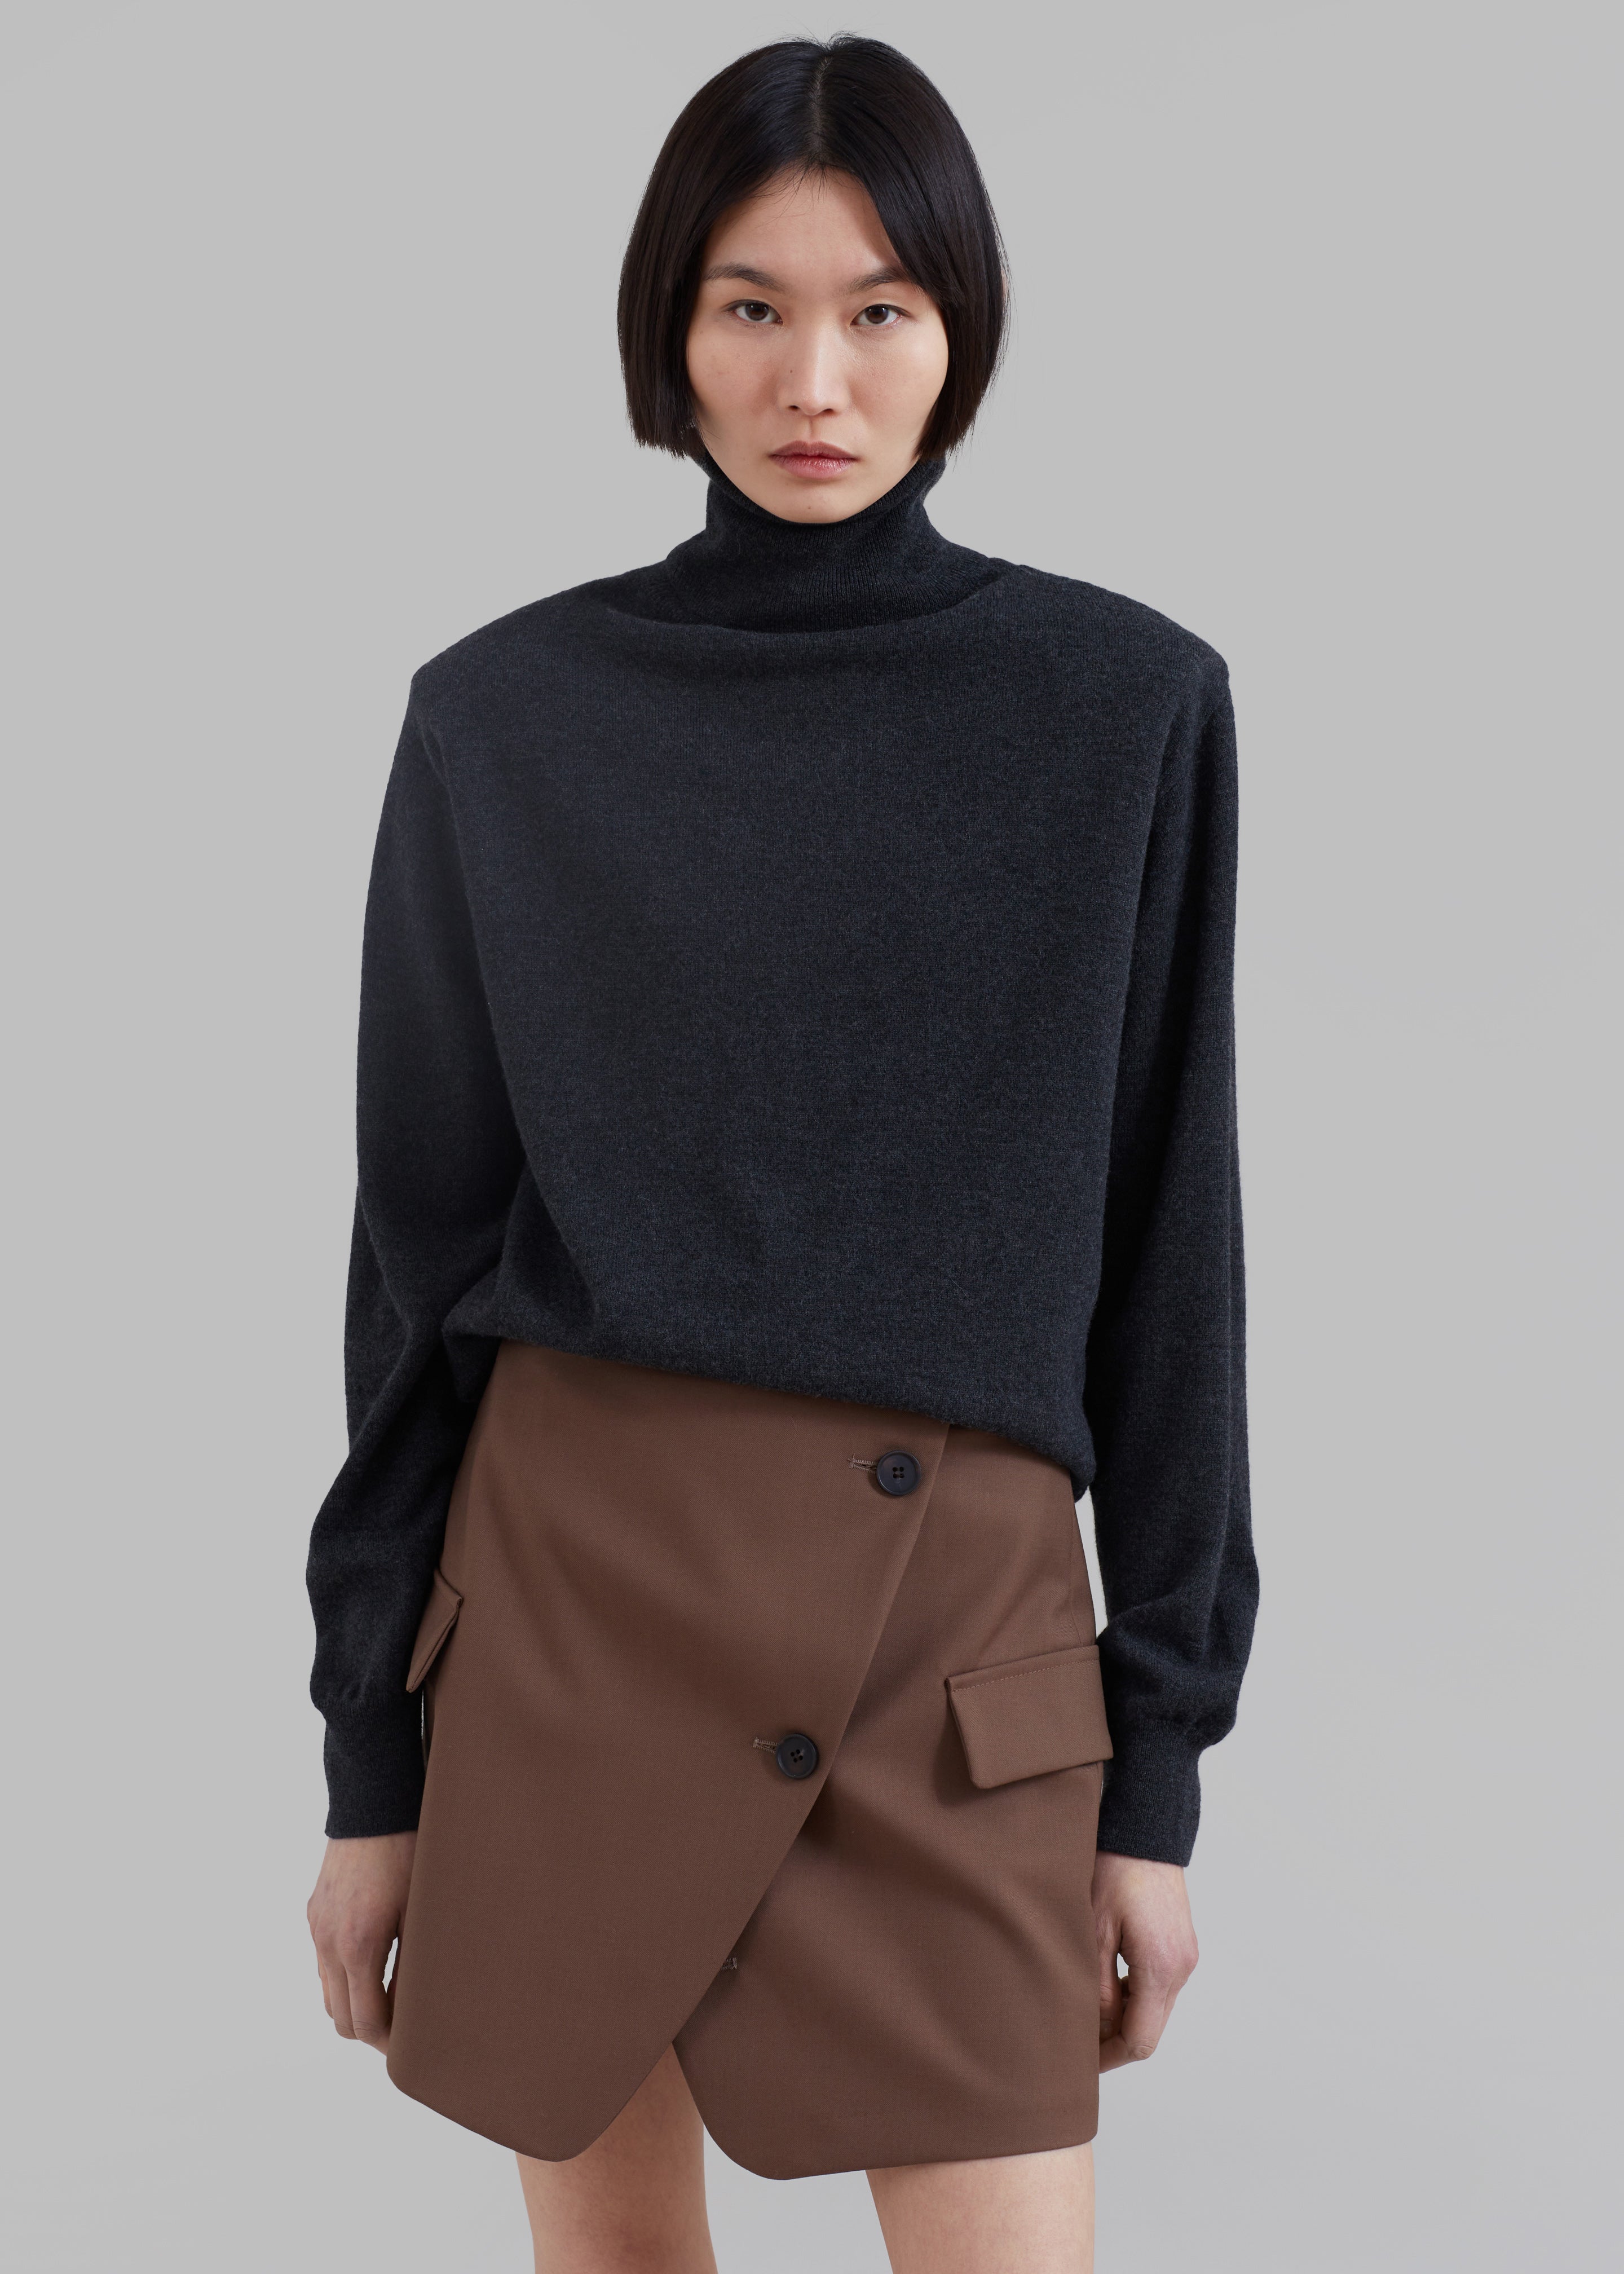 Ines Thin Padded Turtleneck - Charcoal - 9